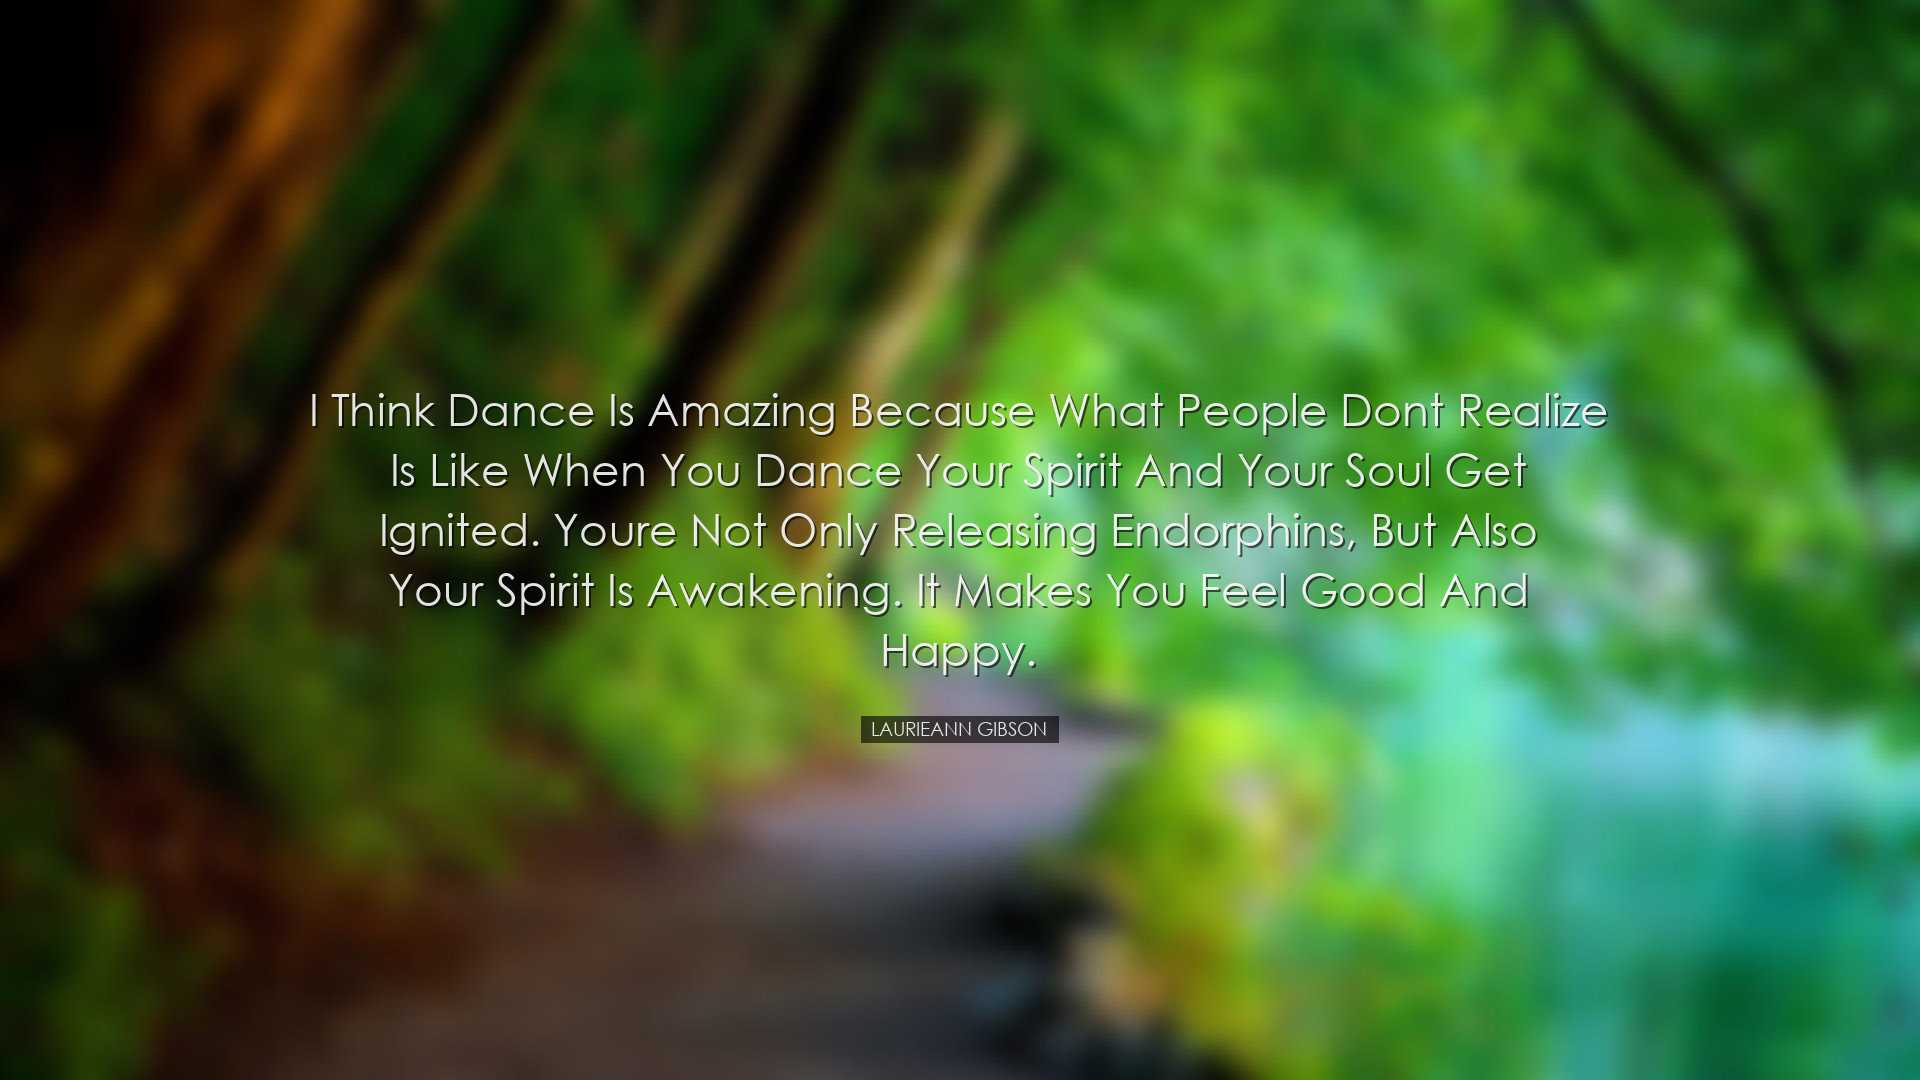 I think dance is amazing because what people dont realize is like